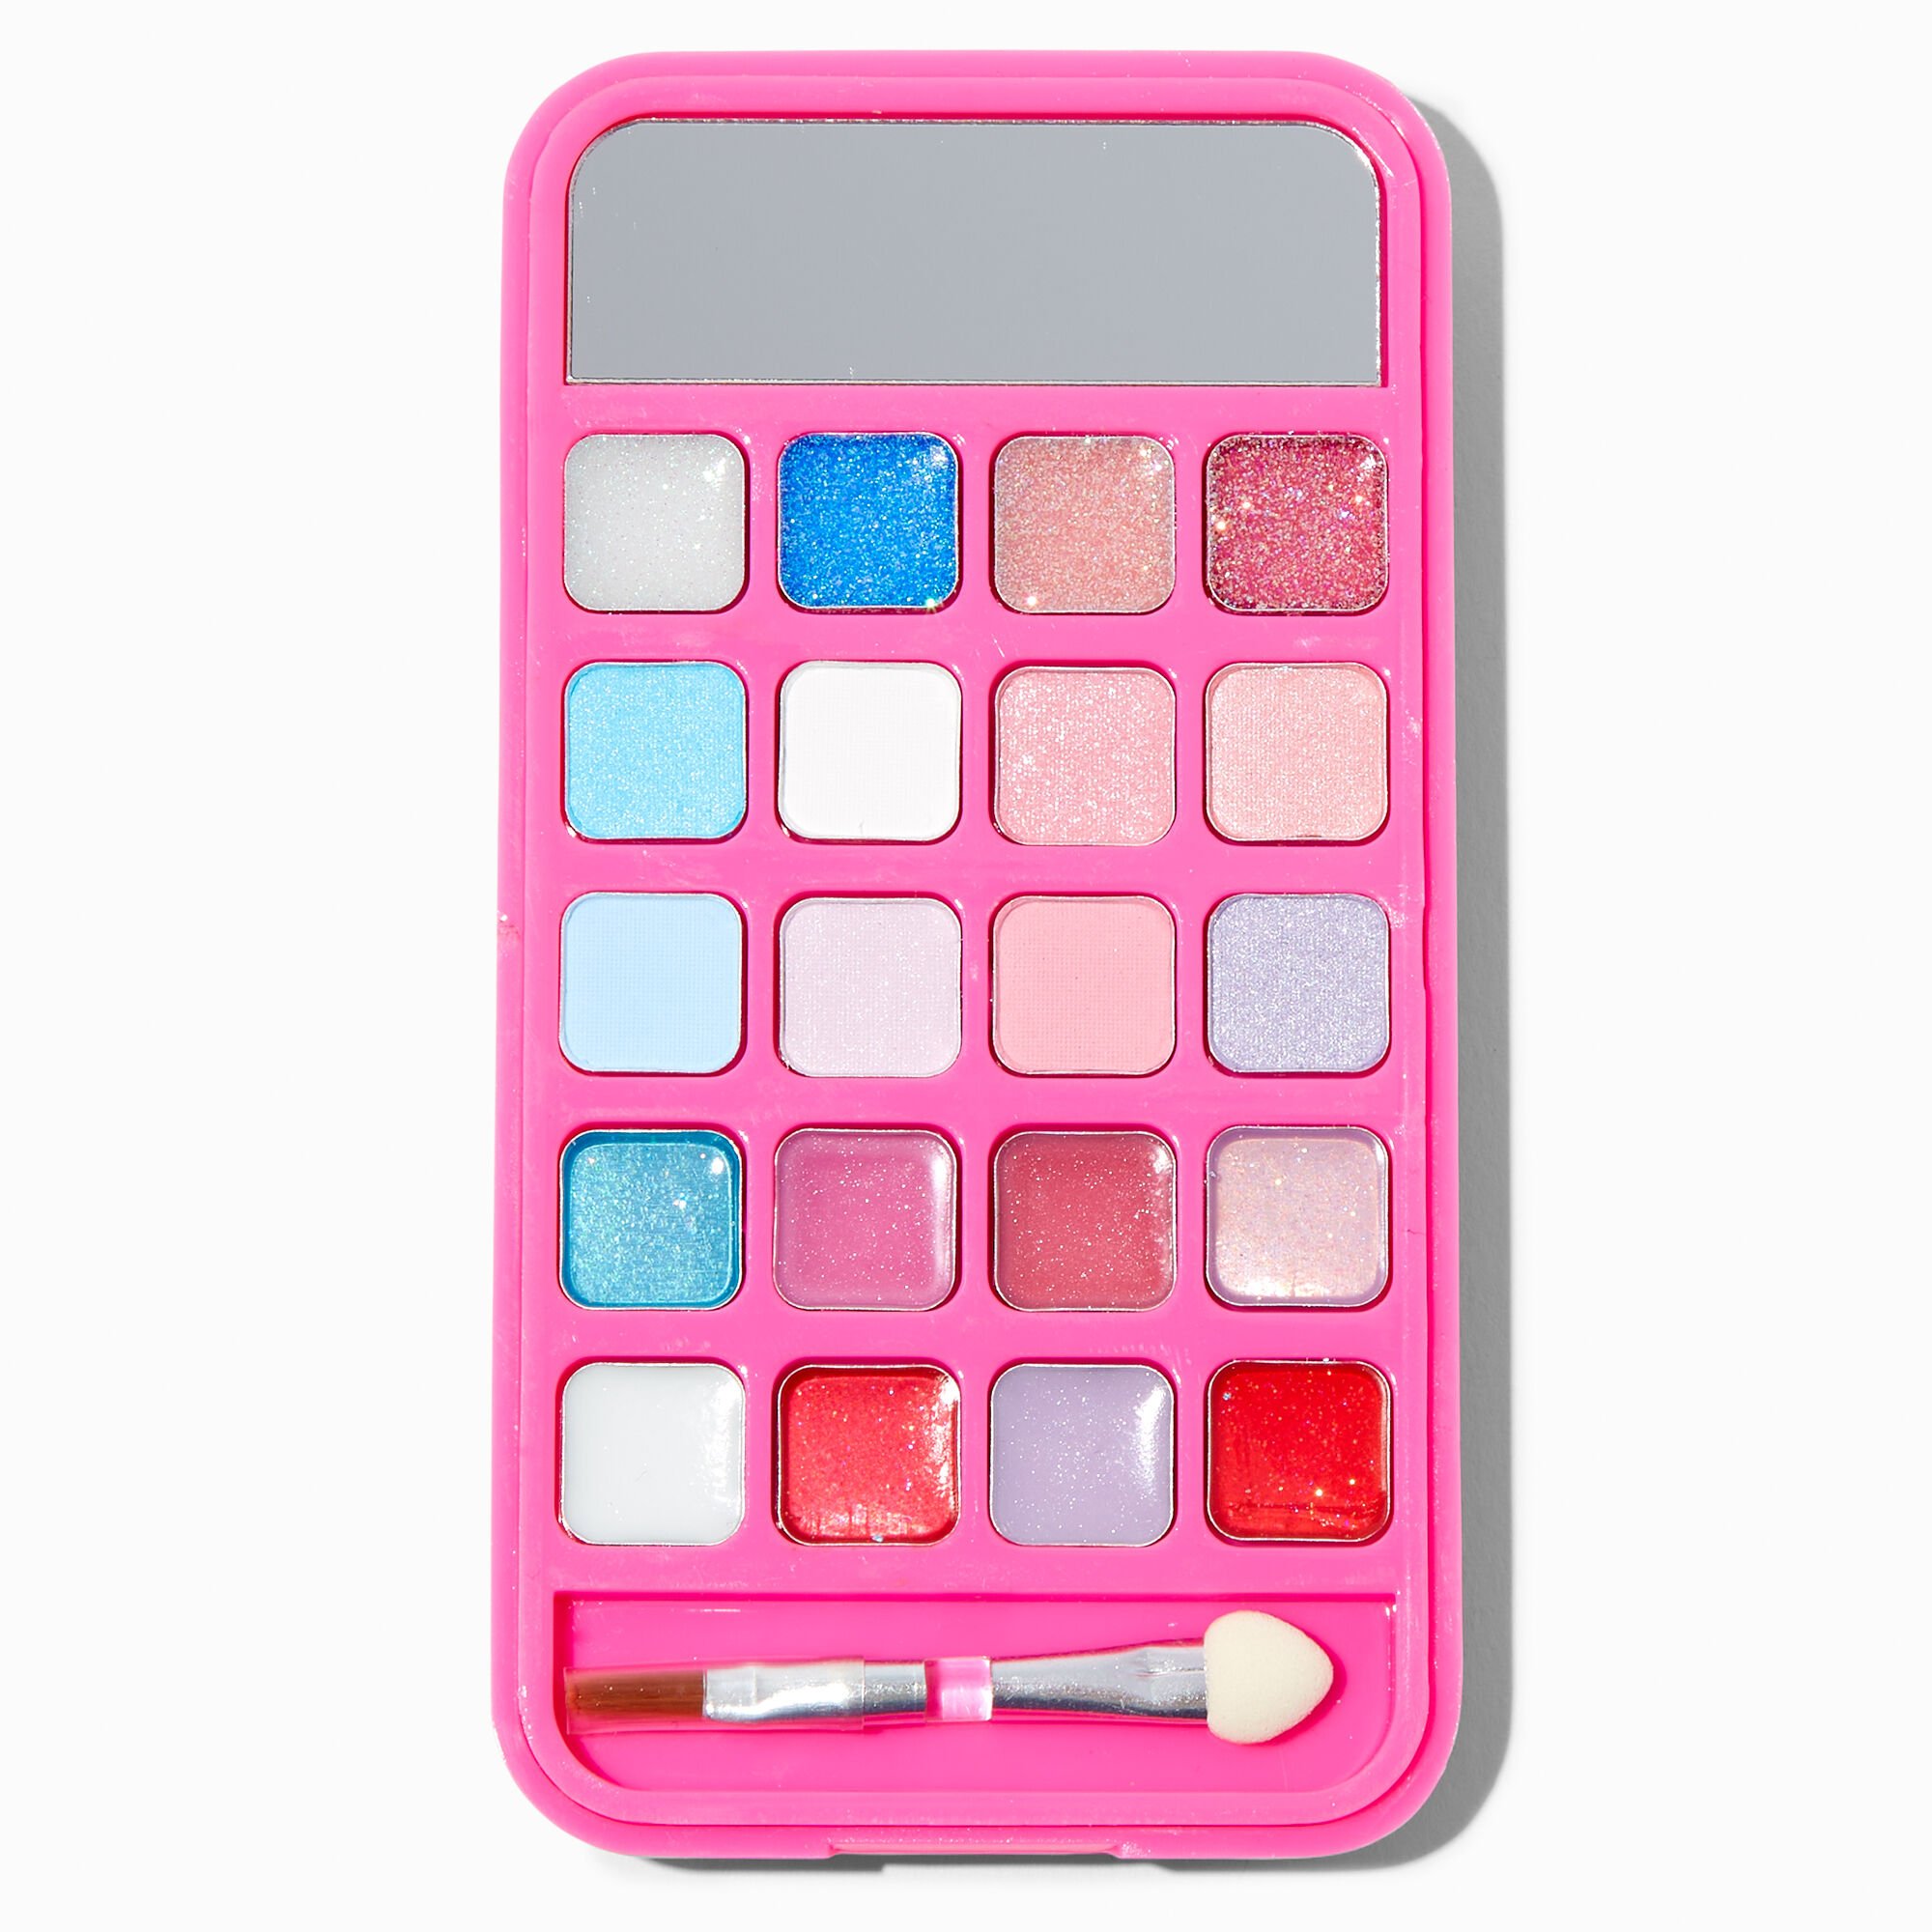 View Claires Strawberry Bling Cellphone Makeup Palette information